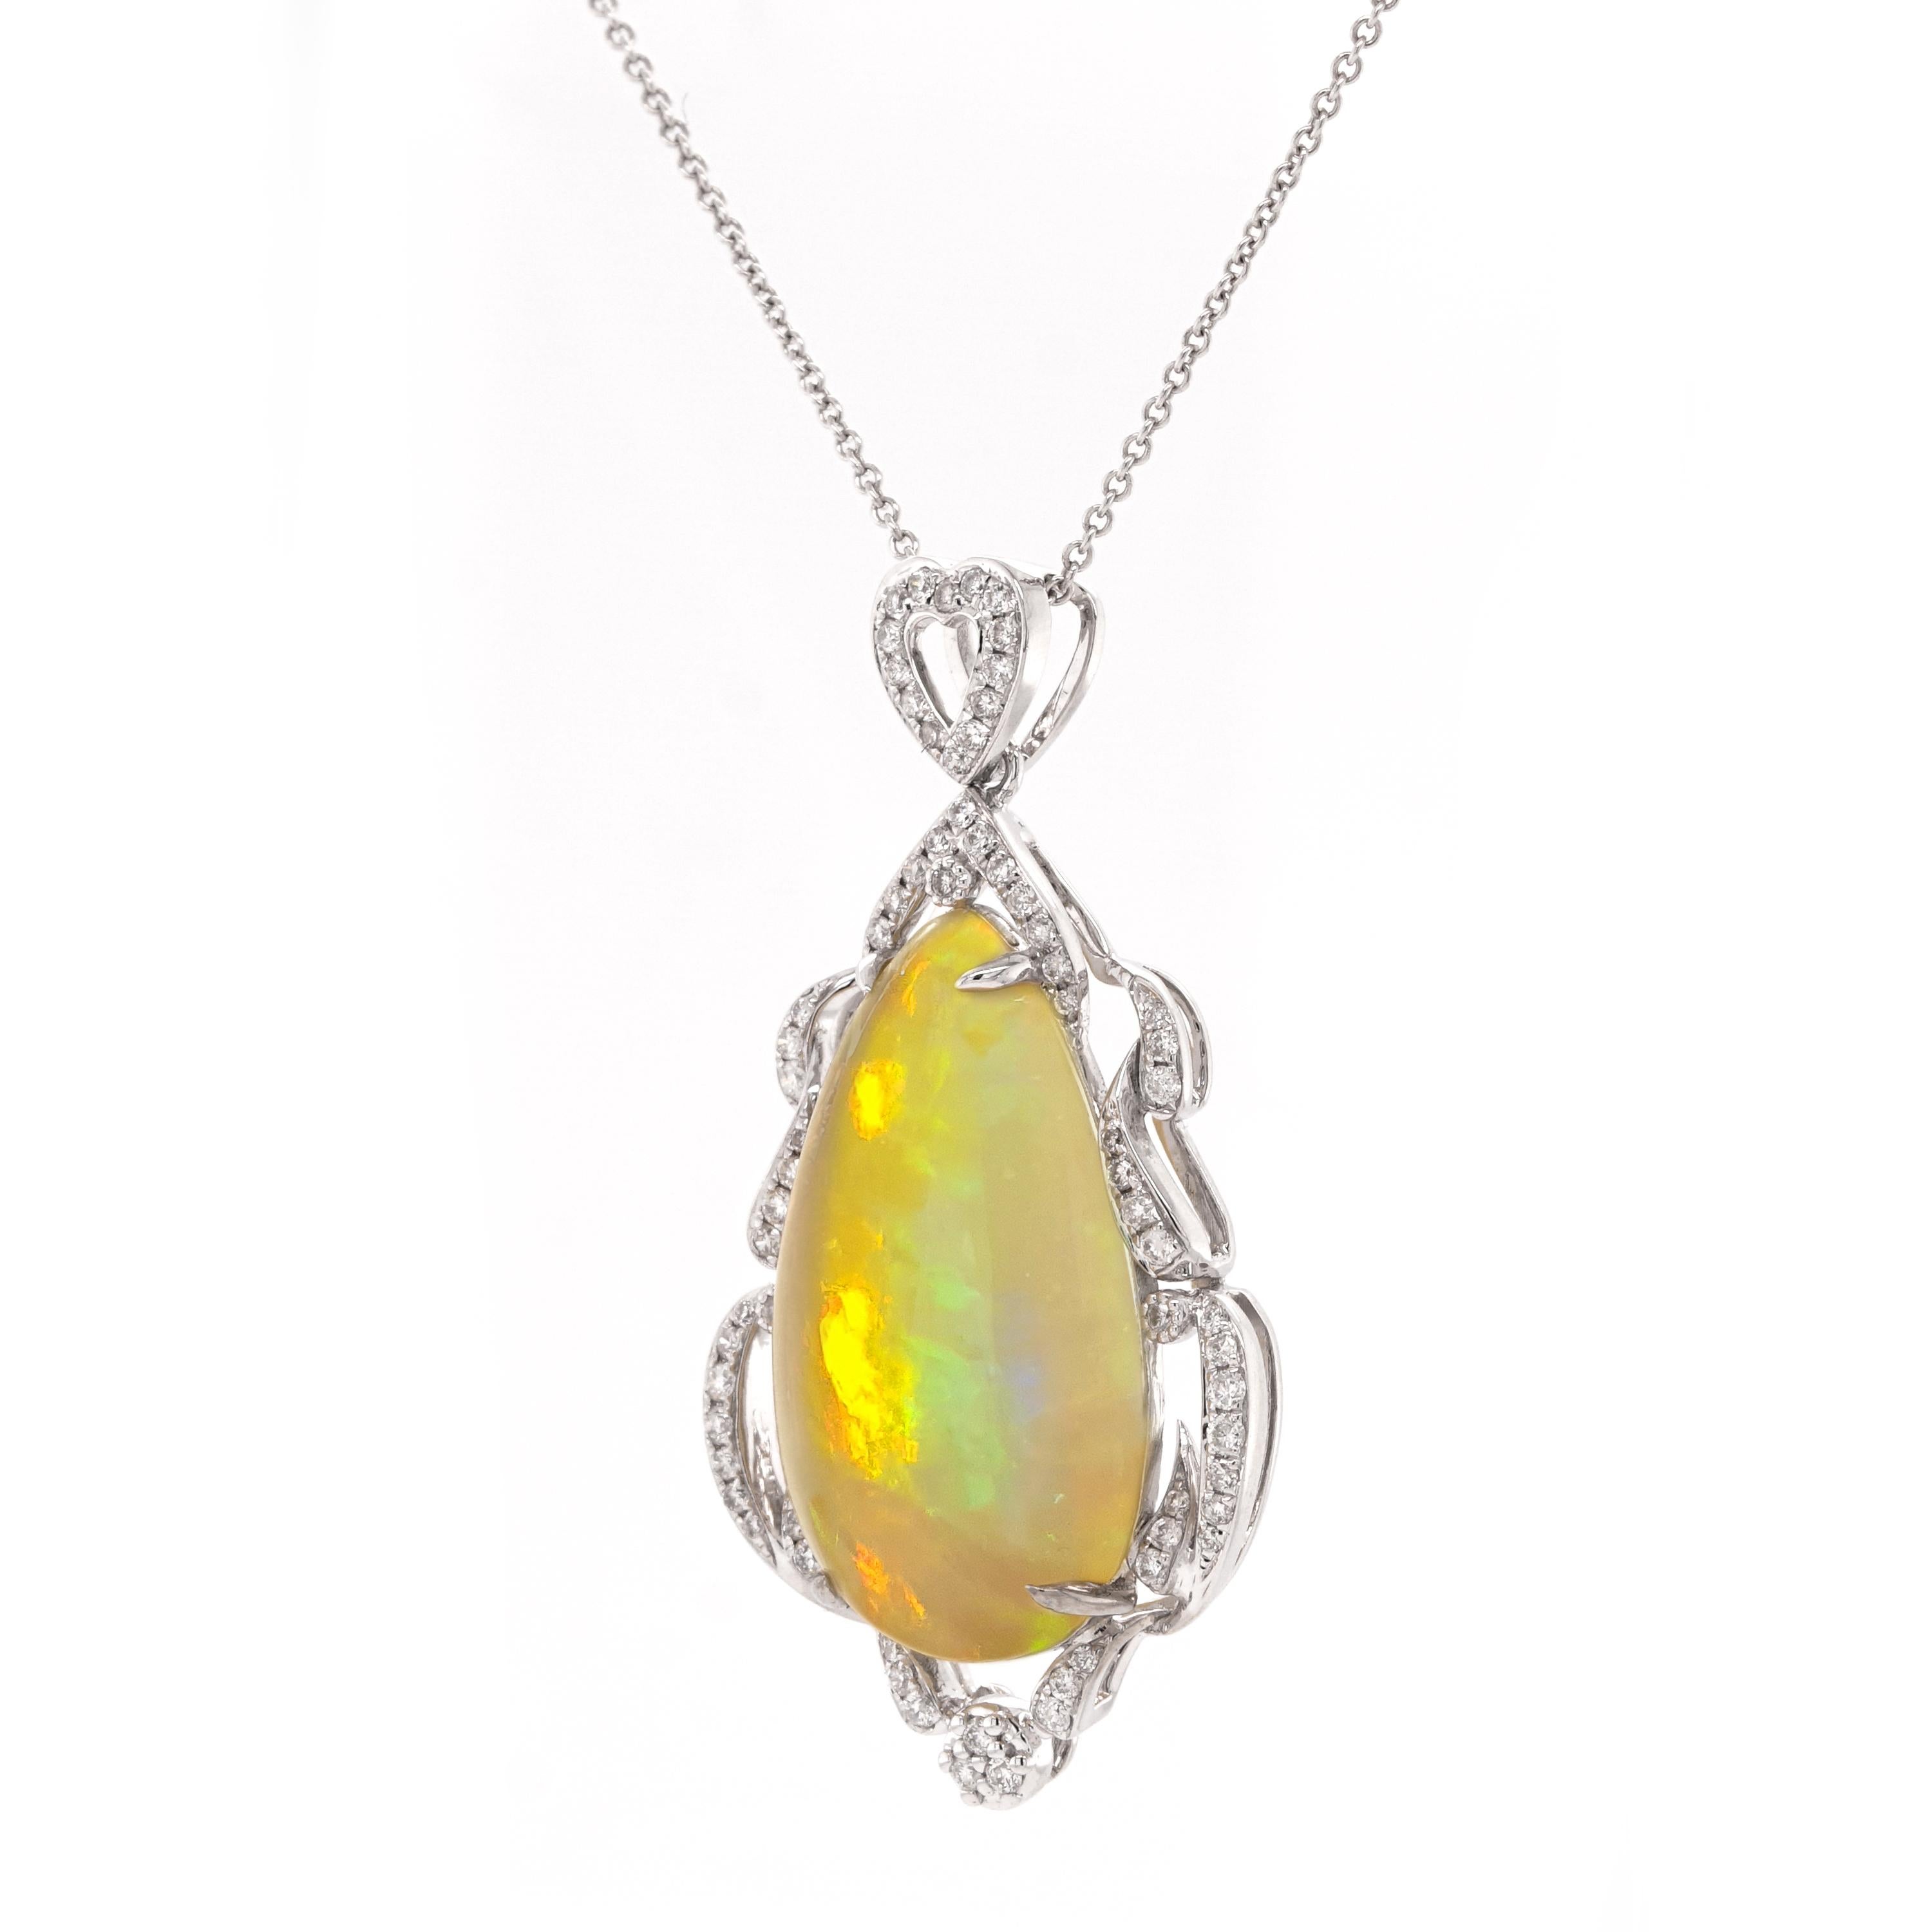 Ethiopian opal pendant with citrusy tones. An 18ct white gold pendant featuring an 8.45ct opal pendant embellished with a frame of sparkling diamonds cascading from a heart-shaped bail.

- Pendant size (HxWxD): 38 × 20 × 7mm
- Chain length: 16